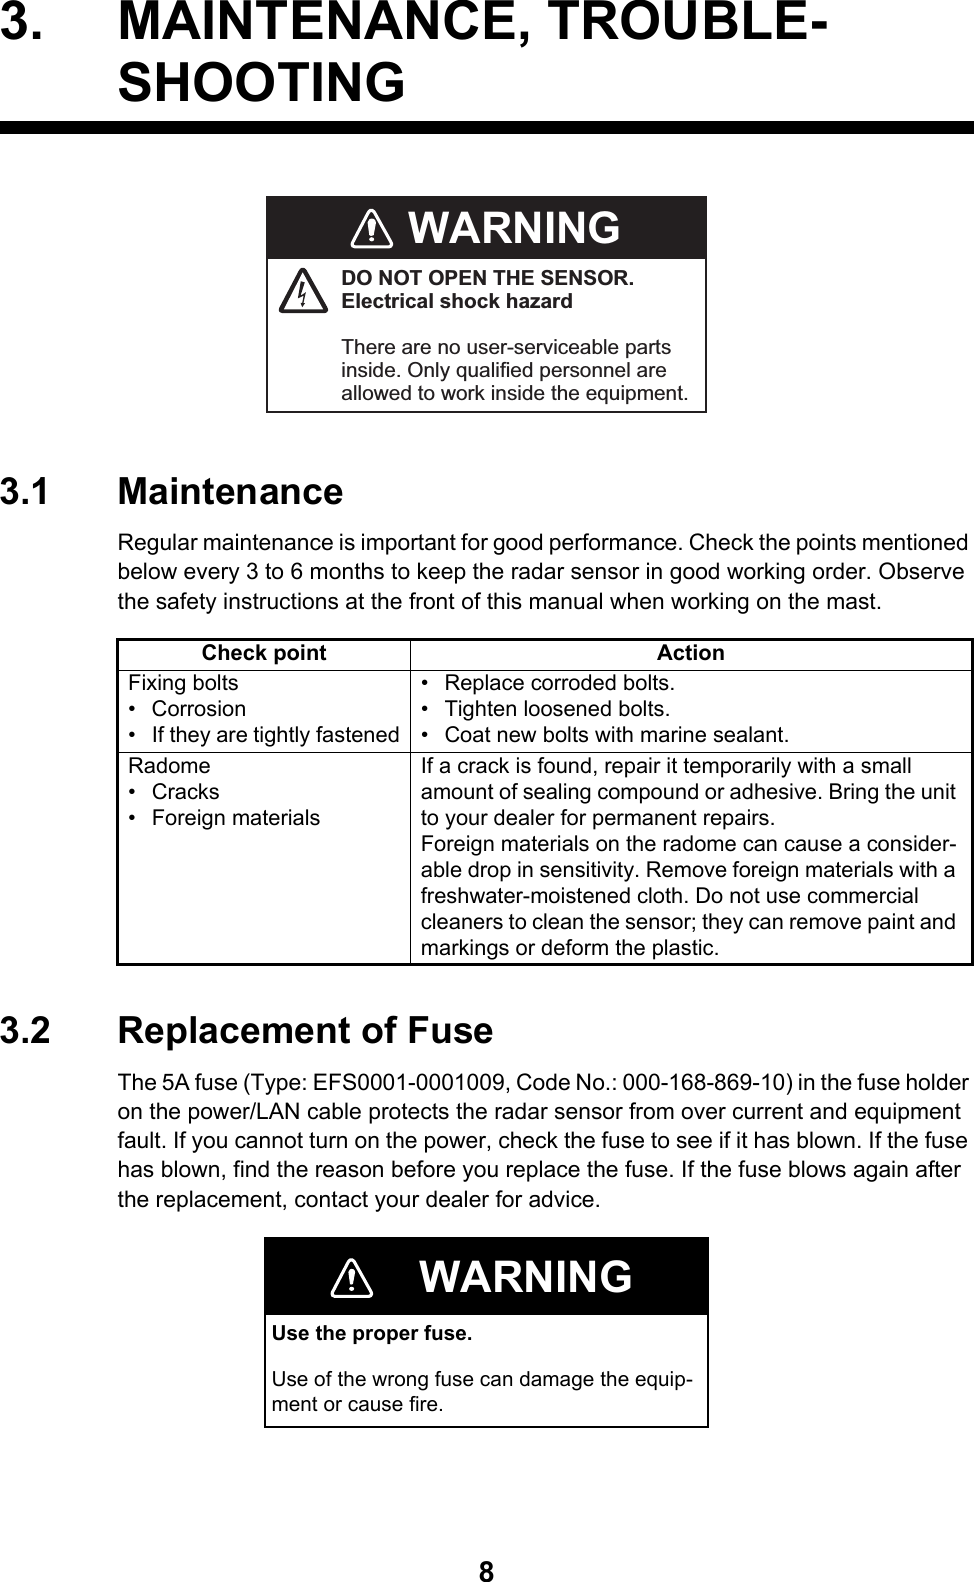 83. MAINTENANCE, TROUBLE- SHOOTING3.1 MaintenanceRegular maintenance is important for good performance. Check the points mentioned below every 3 to 6 months to keep the radar sensor in good working order. Observe the safety instructions at the front of this manual when working on the mast.3.2 Replacement of FuseThe 5A fuse (Type: EFS0001-0001009, Code No.: 000-168-869-10) in the fuse holder on the power/LAN cable protects the radar sensor from over current and equipment fault. If you cannot turn on the power, check the fuse to see if it has blown. If the fuse has blown, find the reason before you replace the fuse. If the fuse blows again after the replacement, contact your dealer for advice.Check point ActionFixing bolts• Corrosion•  If they are tightly fastened• Replace corroded bolts.•  Tighten loosened bolts. •  Coat new bolts with marine sealant.Radome• Cracks• Foreign materialsIf a crack is found, repair it temporarily with a small amount of sealing compound or adhesive. Bring the unit to your dealer for permanent repairs.Foreign materials on the radome can cause a consider-able drop in sensitivity. Remove foreign materials with a freshwater-moistened cloth. Do not use commercial cleaners to clean the sensor; they can remove paint and markings or deform the plastic.WARNINGUse the proper fuse.Use of the wrong fuse can damage the equip-ment or cause fire.WARNINGDO NOT OPEN THE SENSOR.Electrical shock hazardThere are no user-serviceable parts inside. Only qualified personnel are allowed to work inside the equipment. 